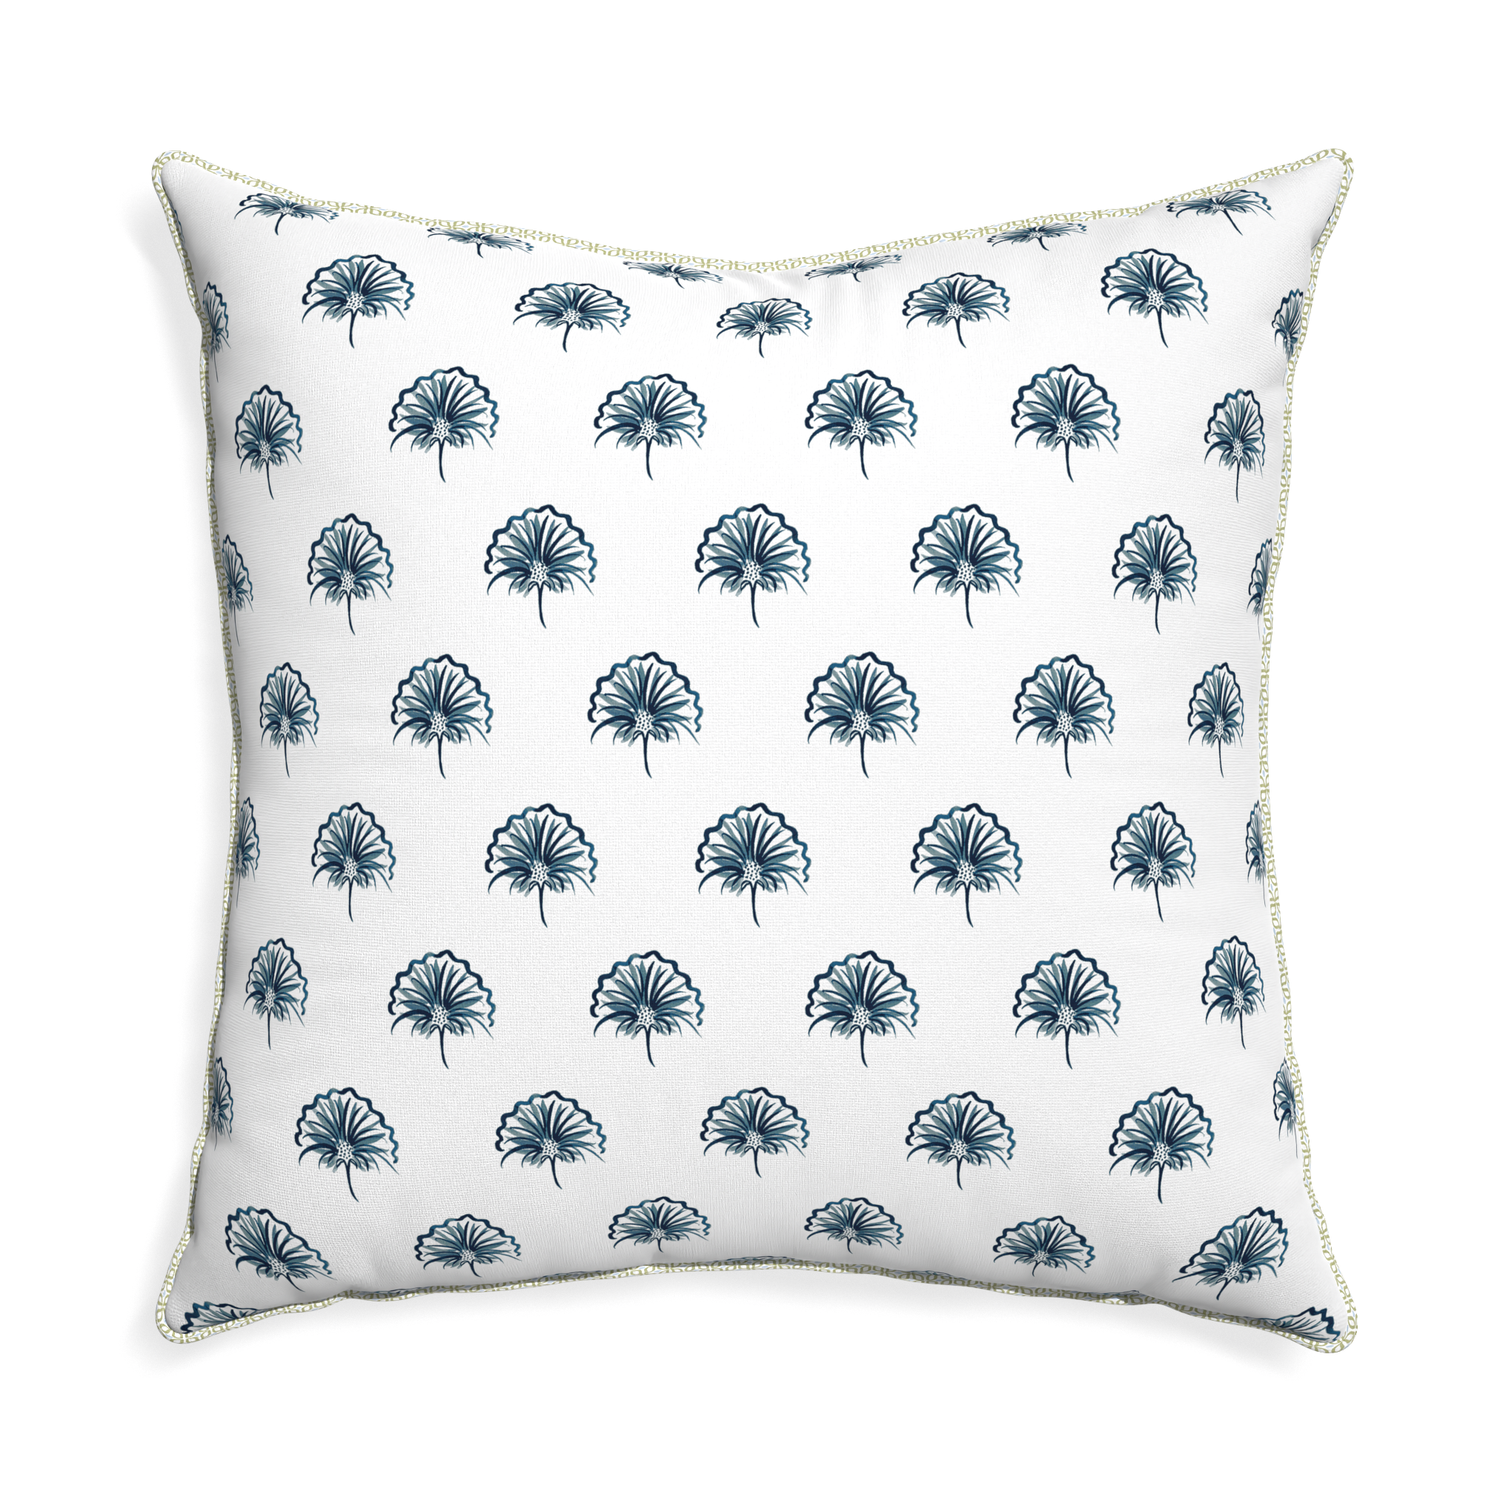 Euro-sham penelope midnight custom pillow with l piping on white background